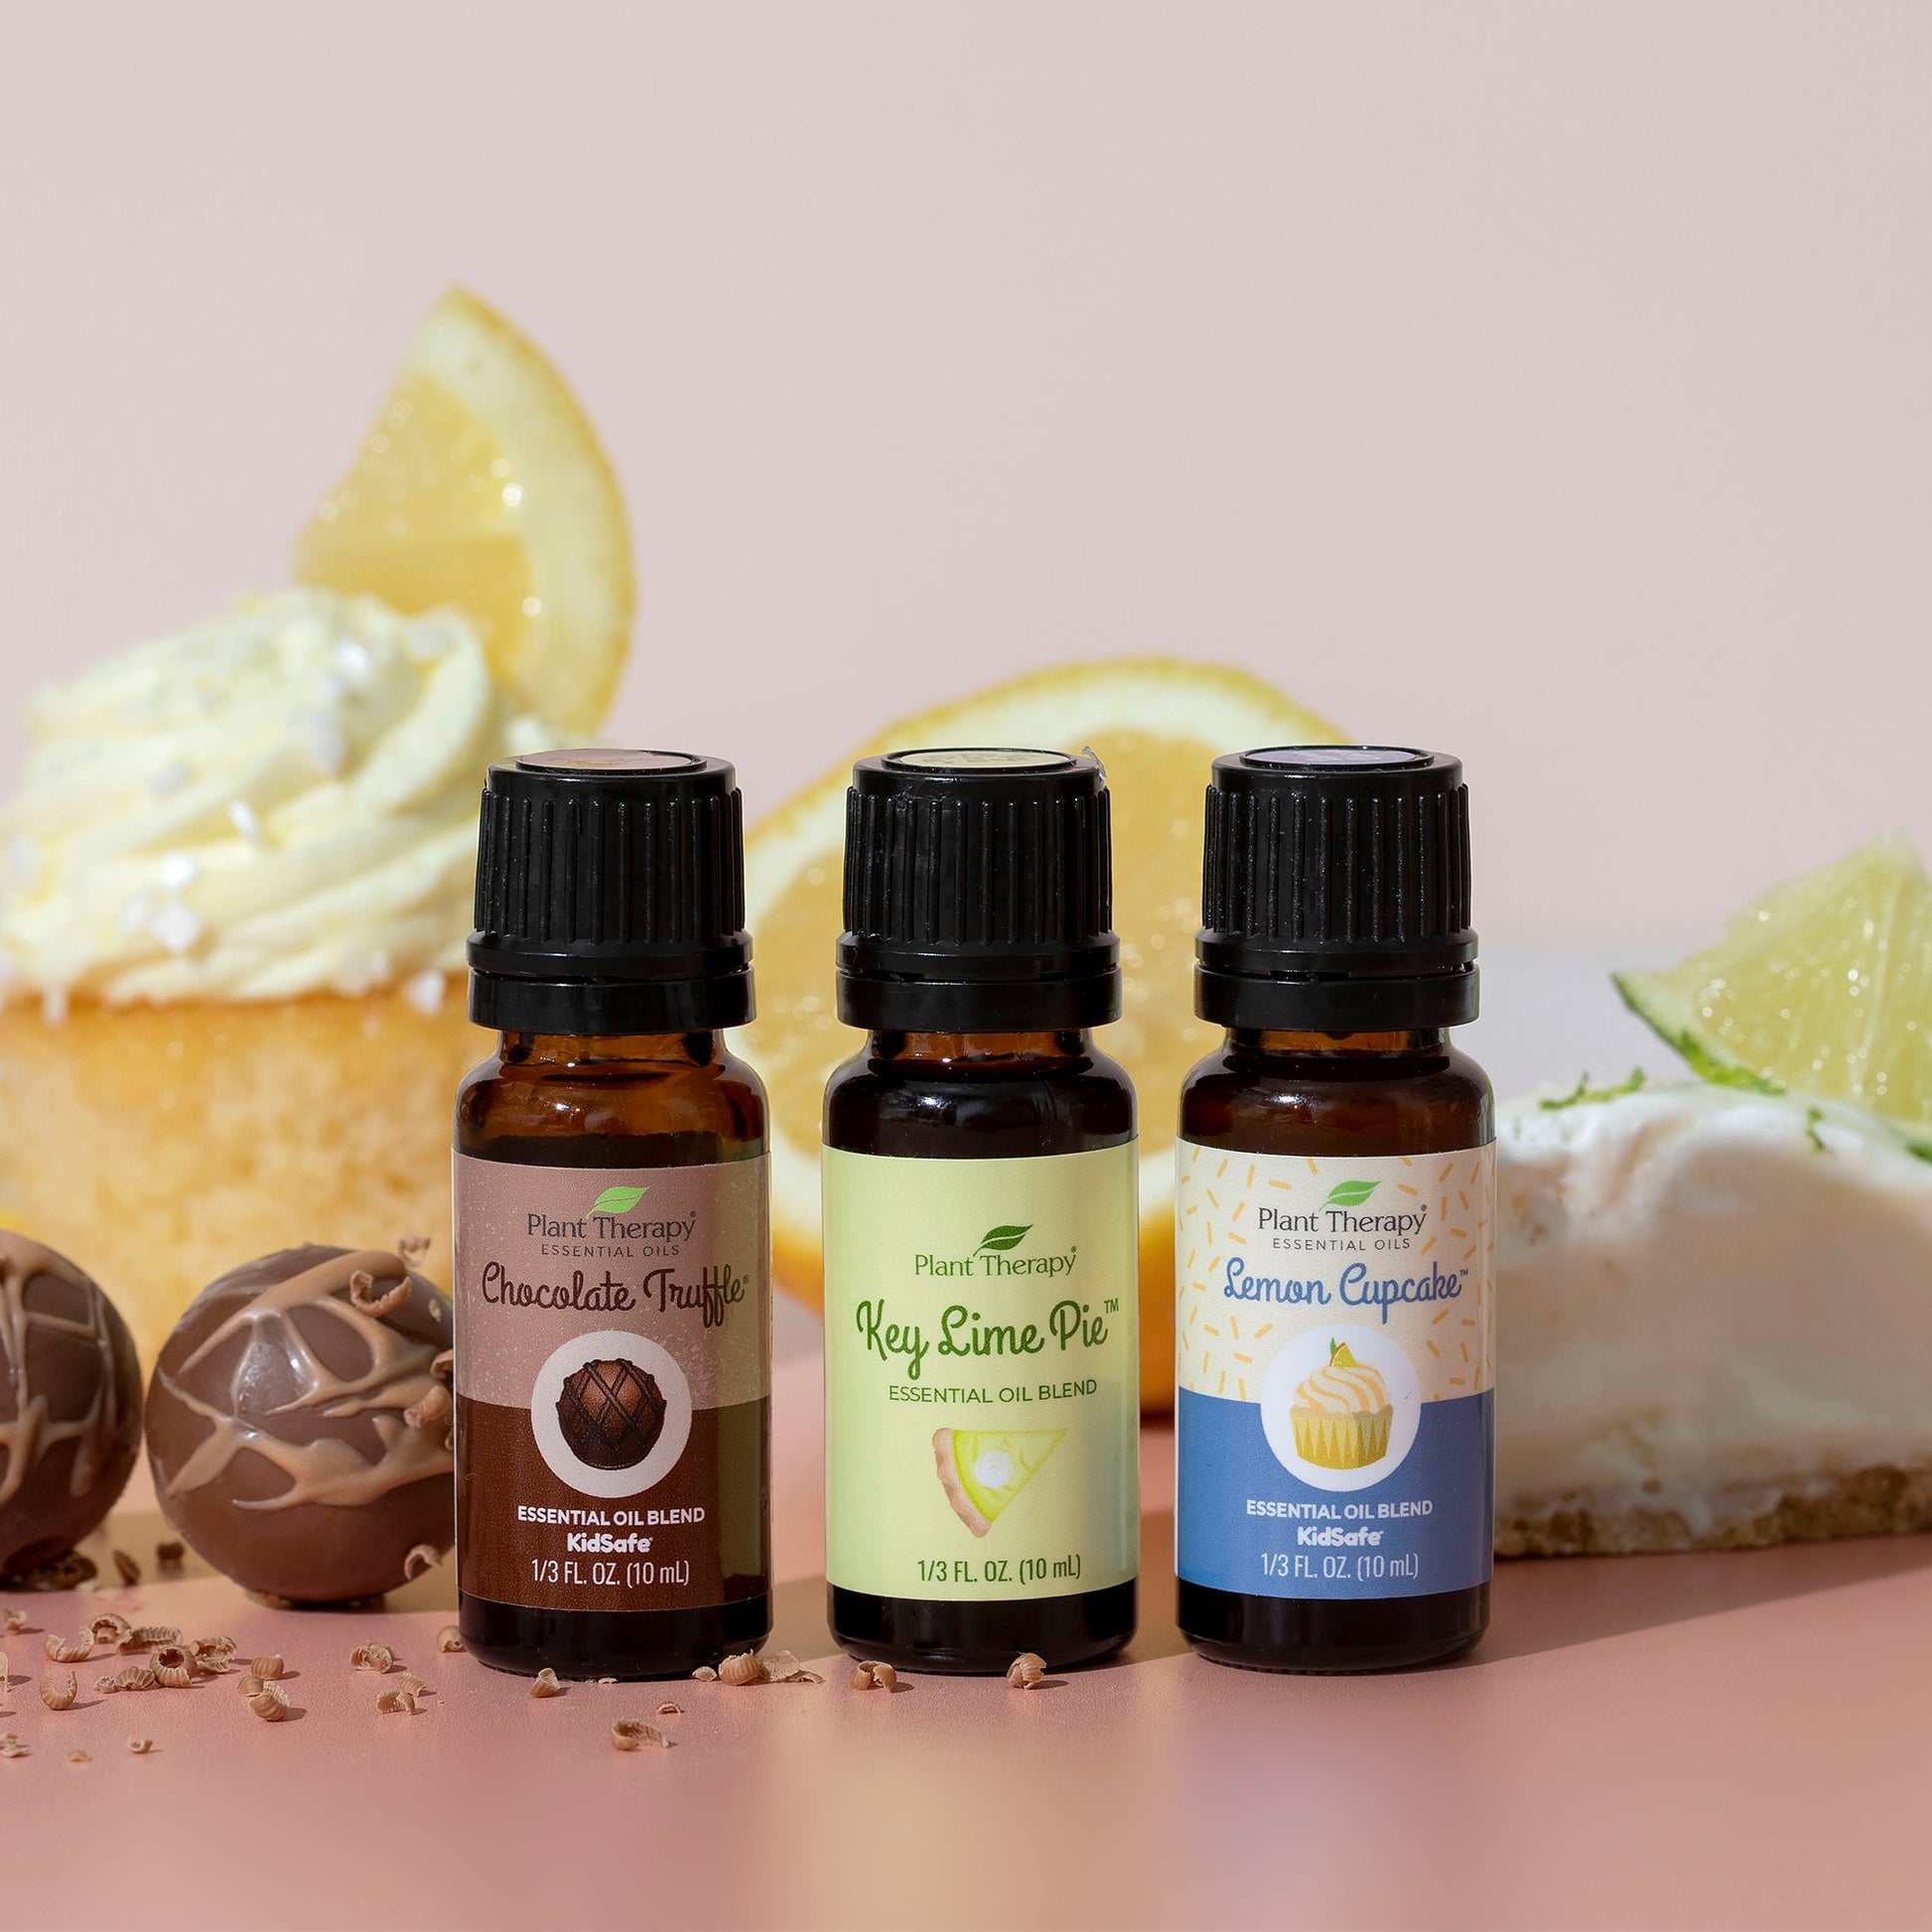 Plant Therapy Lemon Cupcake Essential Oil Blend 10 ml (1/3 oz) 100% Pure, Undiluted, Natural, Therapeutic Grade